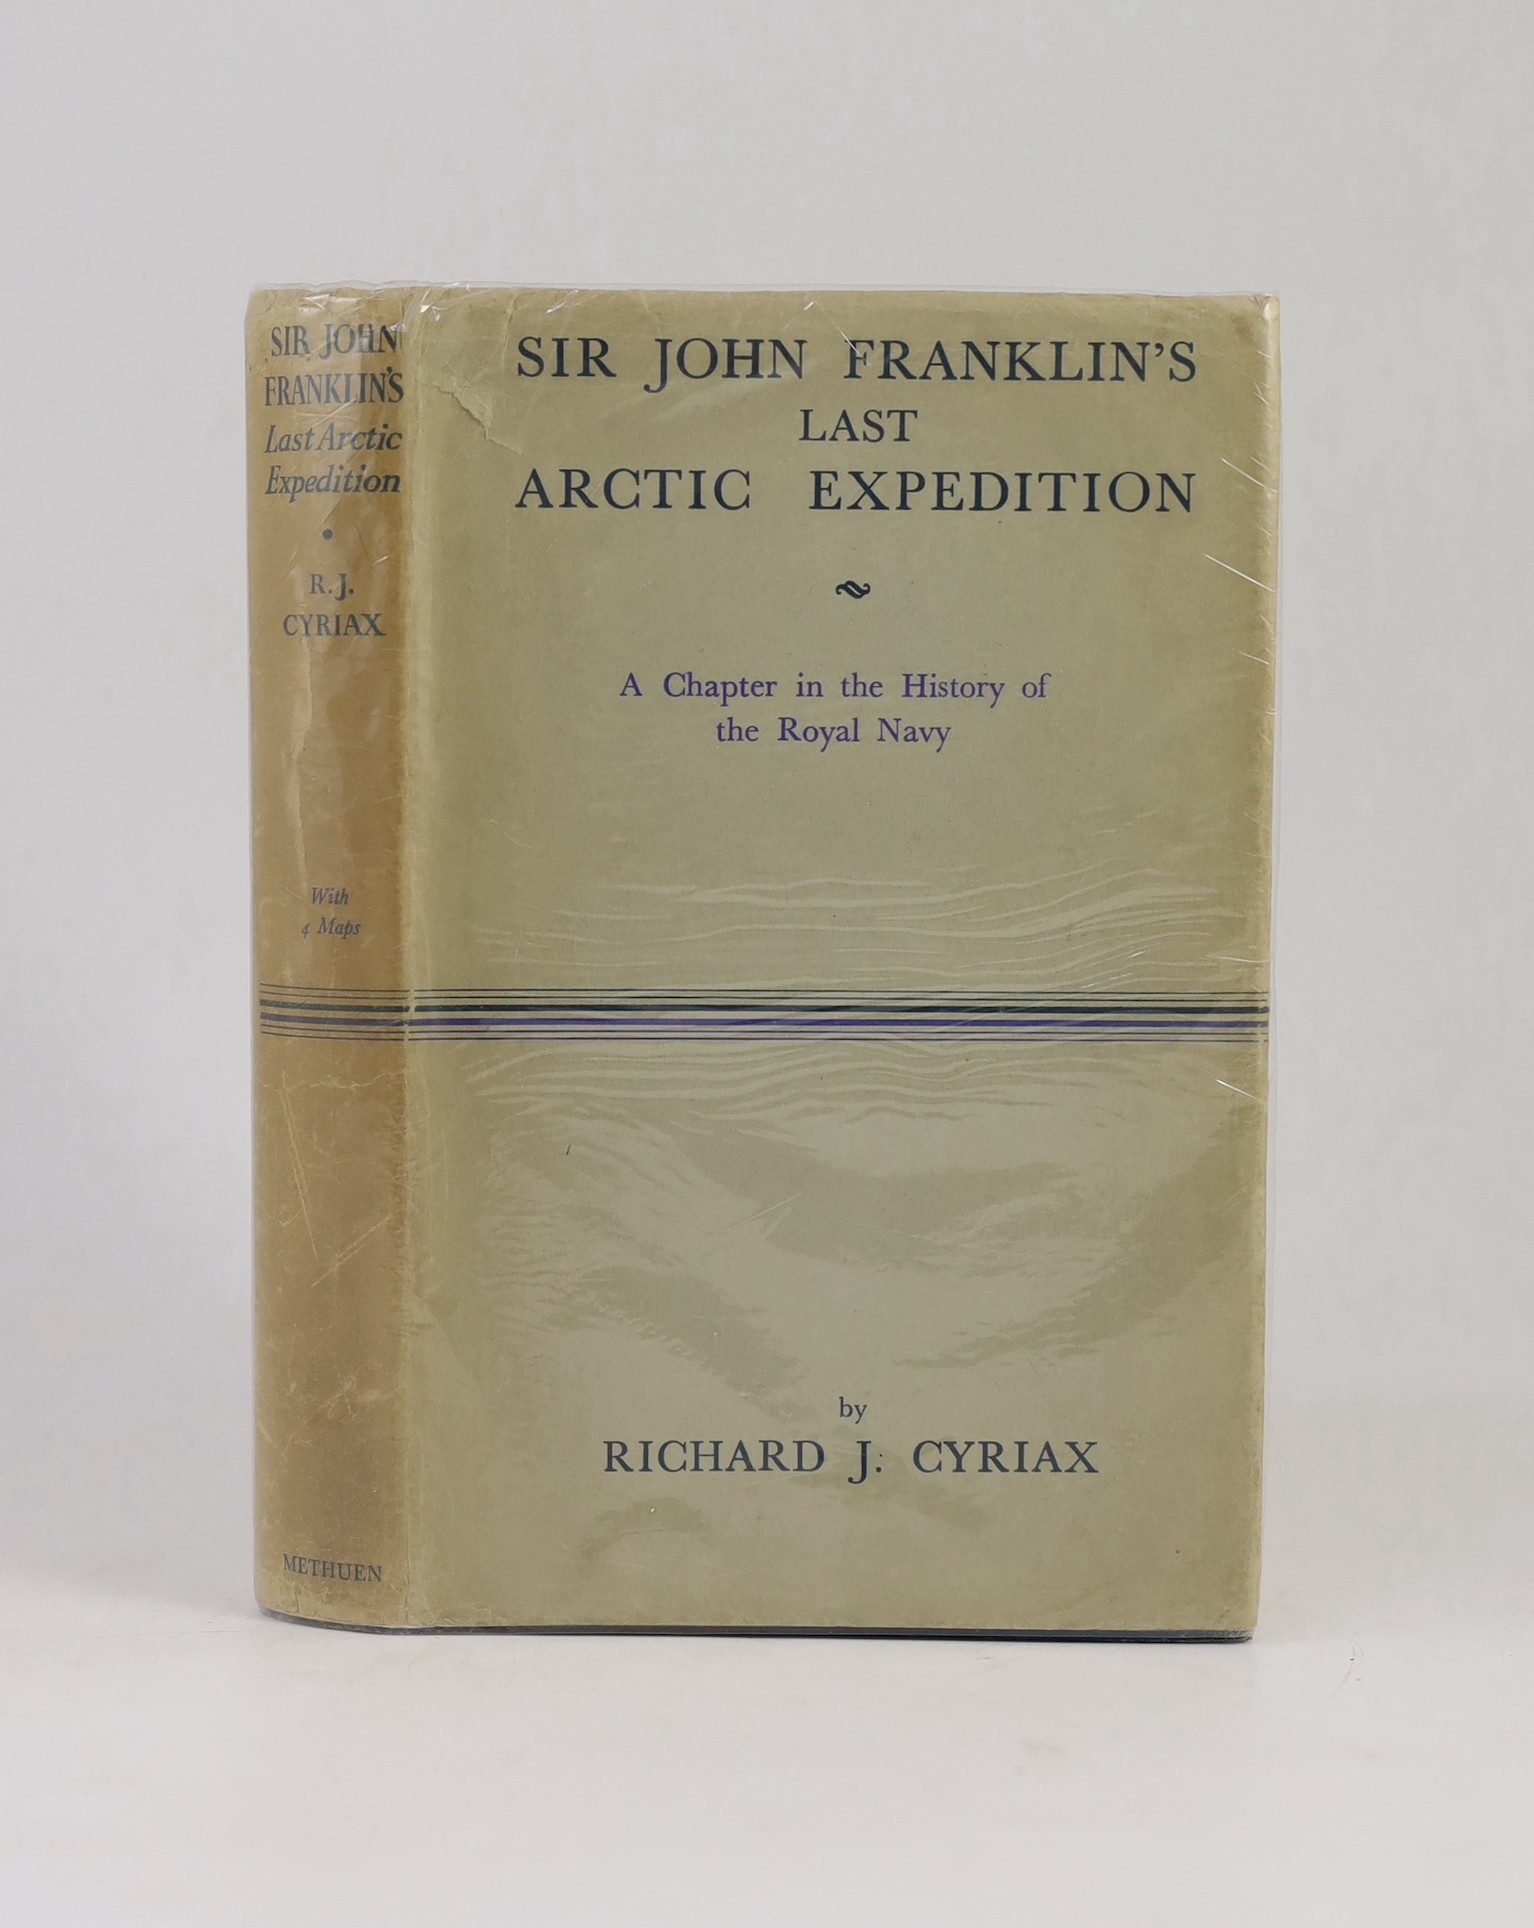 Cyriax, Richard Julius - Sir John Franklin’s Last Arctic Expedition, 8vo, cloth in unclipped d/j, fly leaf with authors presentation inscription to R.H.G.Thomas, with 4 folding maps at end, Methuen & Co. Ltd., London, 19